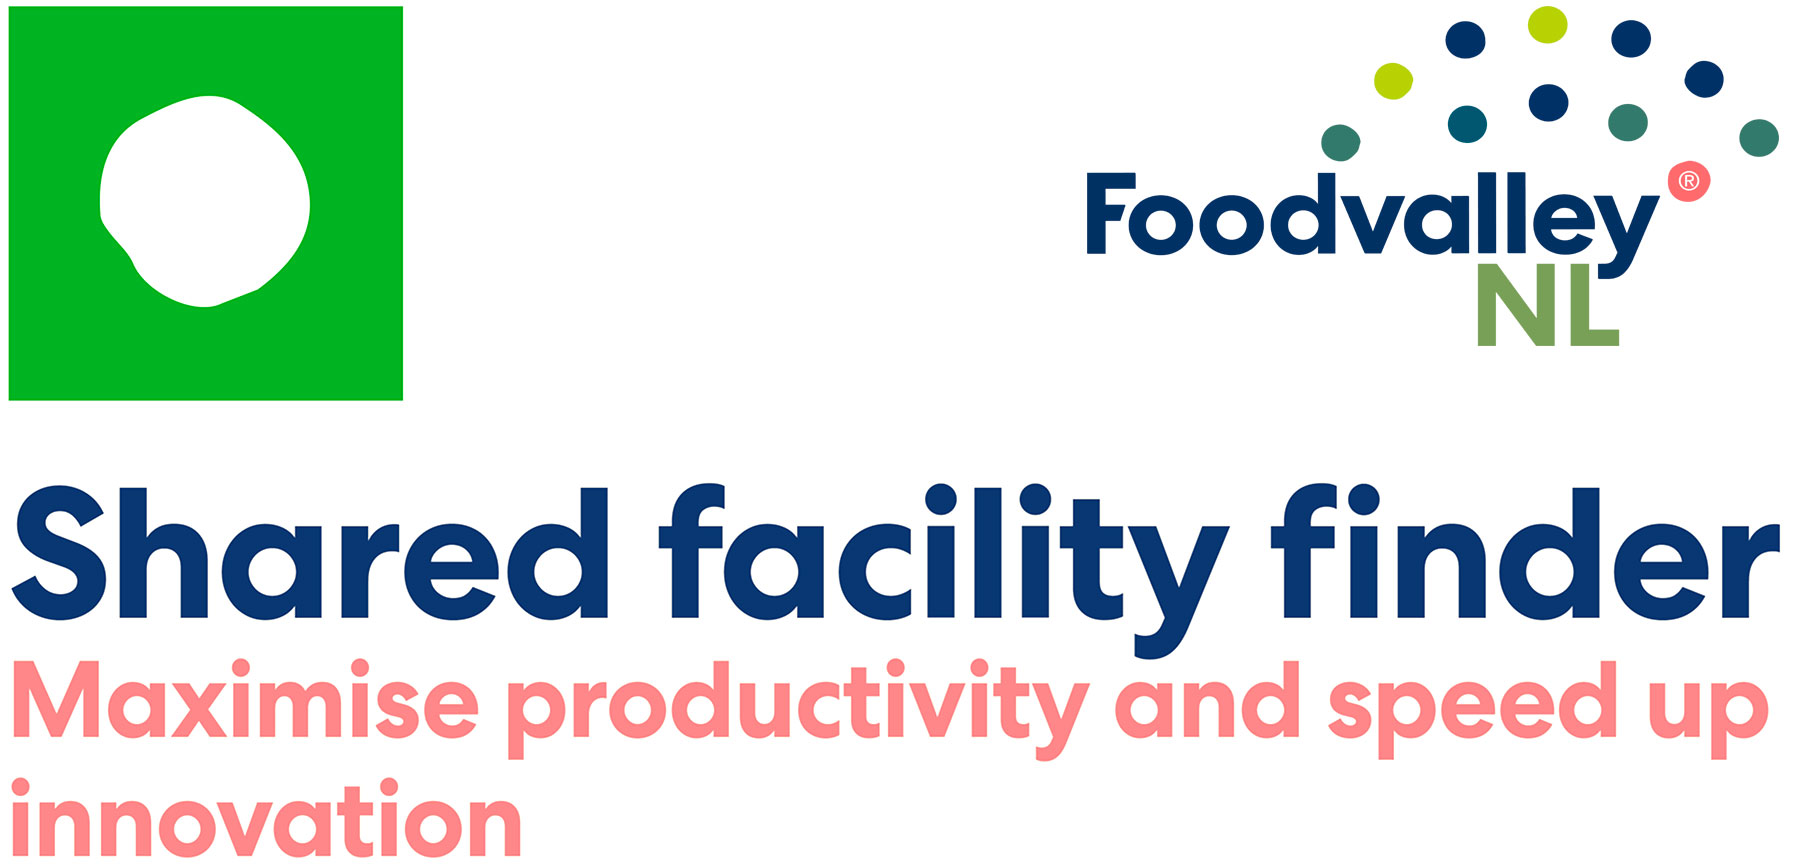 Shared Facility Finder - Foodvalley NL